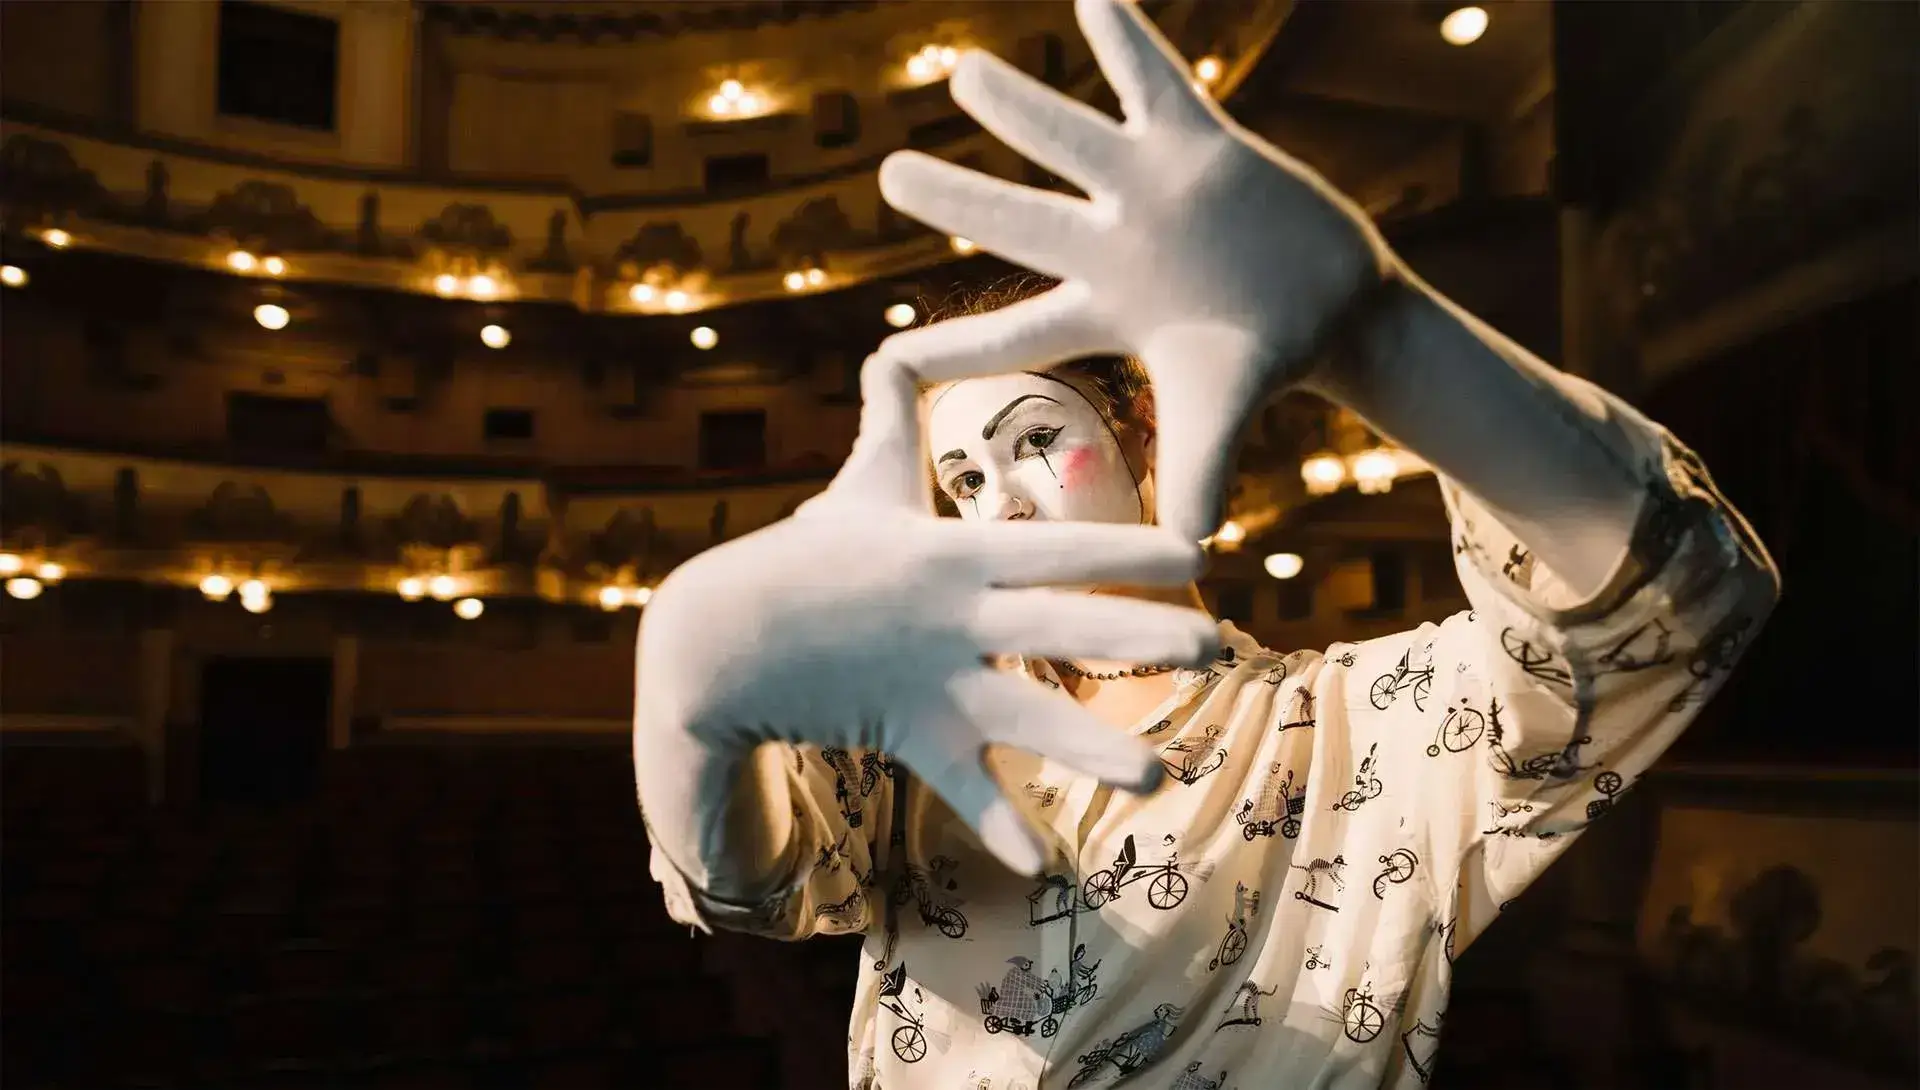 A performer in white gloves and face paint poses dramatically with hands framing their face in an empty, dimly lit theater, creating a scene that would captivate any social media design.